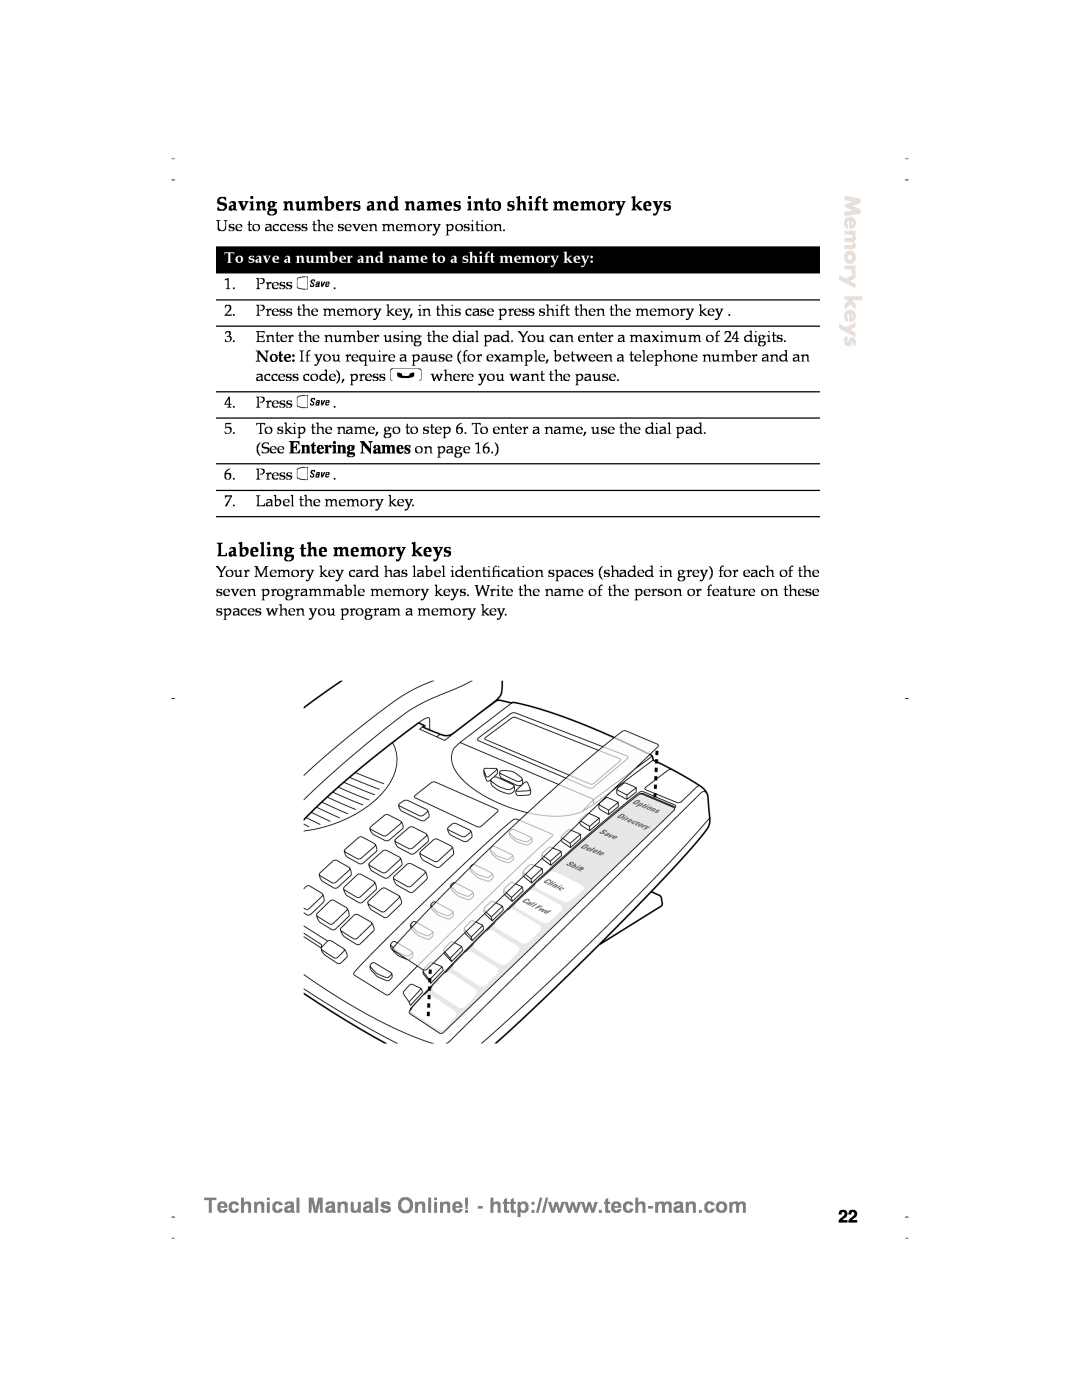 Aastra Telecom 9120 technical manual Saving numbers and names into shift memory keys, Labeling the memory keys, Memory keys 